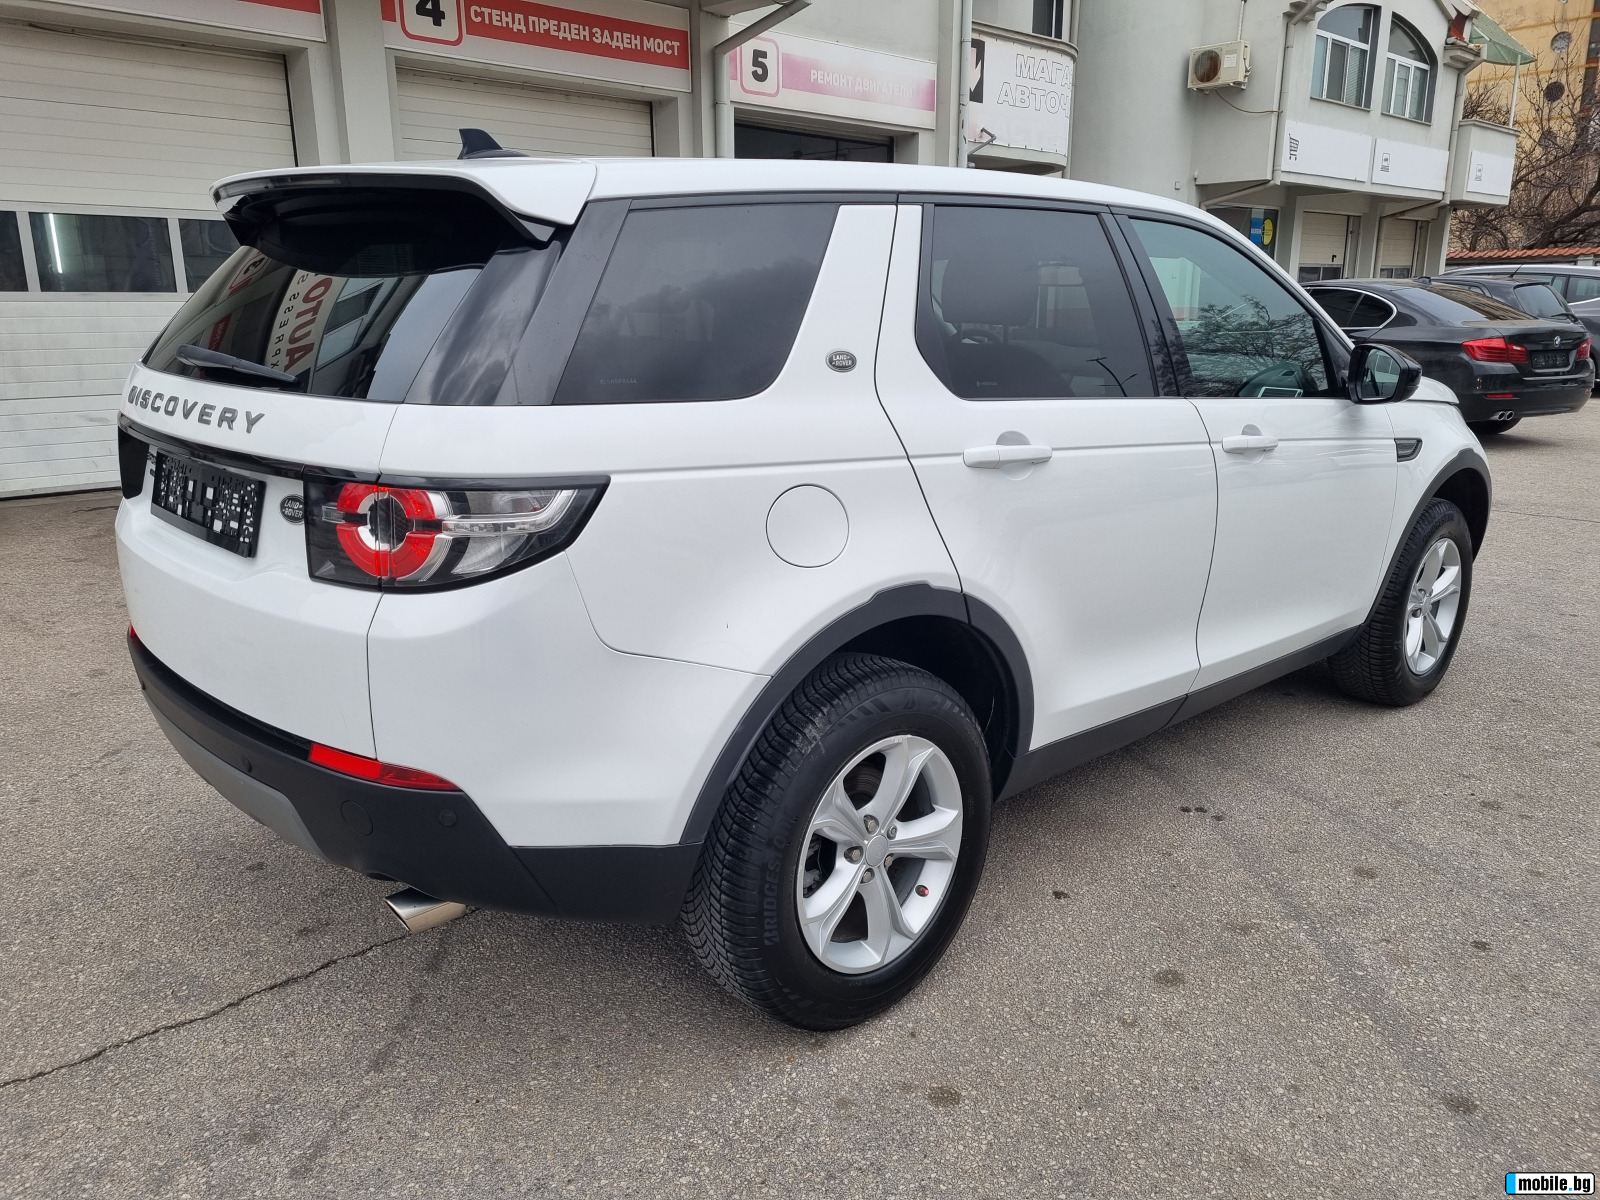 Land Rover Discovery Sport 2.0i-AT (240hp) 4WD | Mobile.bg   5